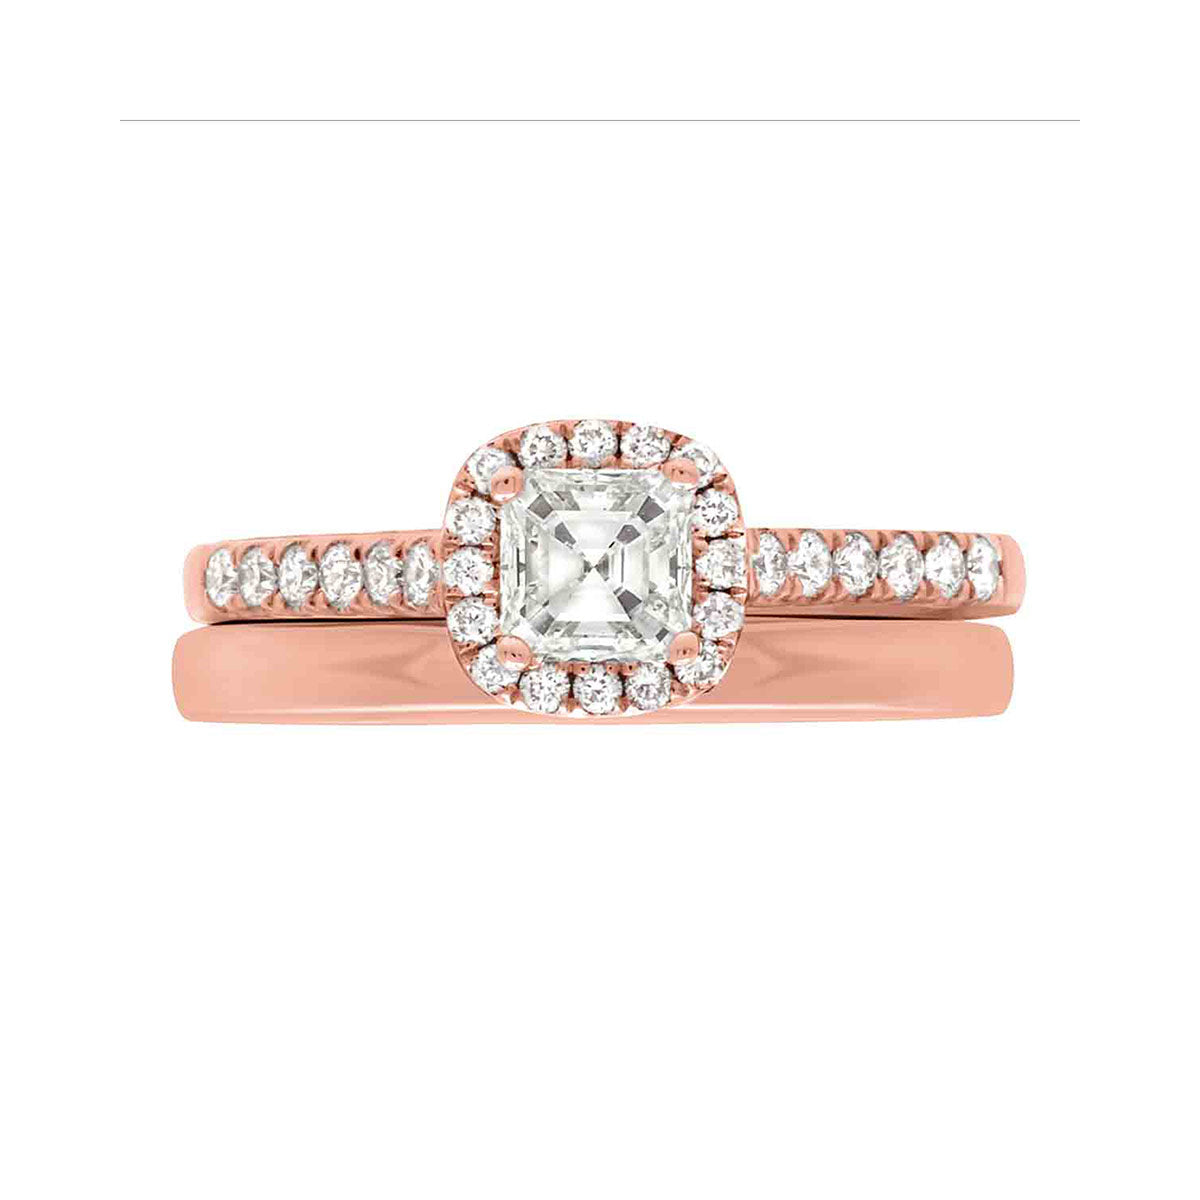 Asscher Halo Diamond Ring in rose gold with a matching rose gold wedding ring